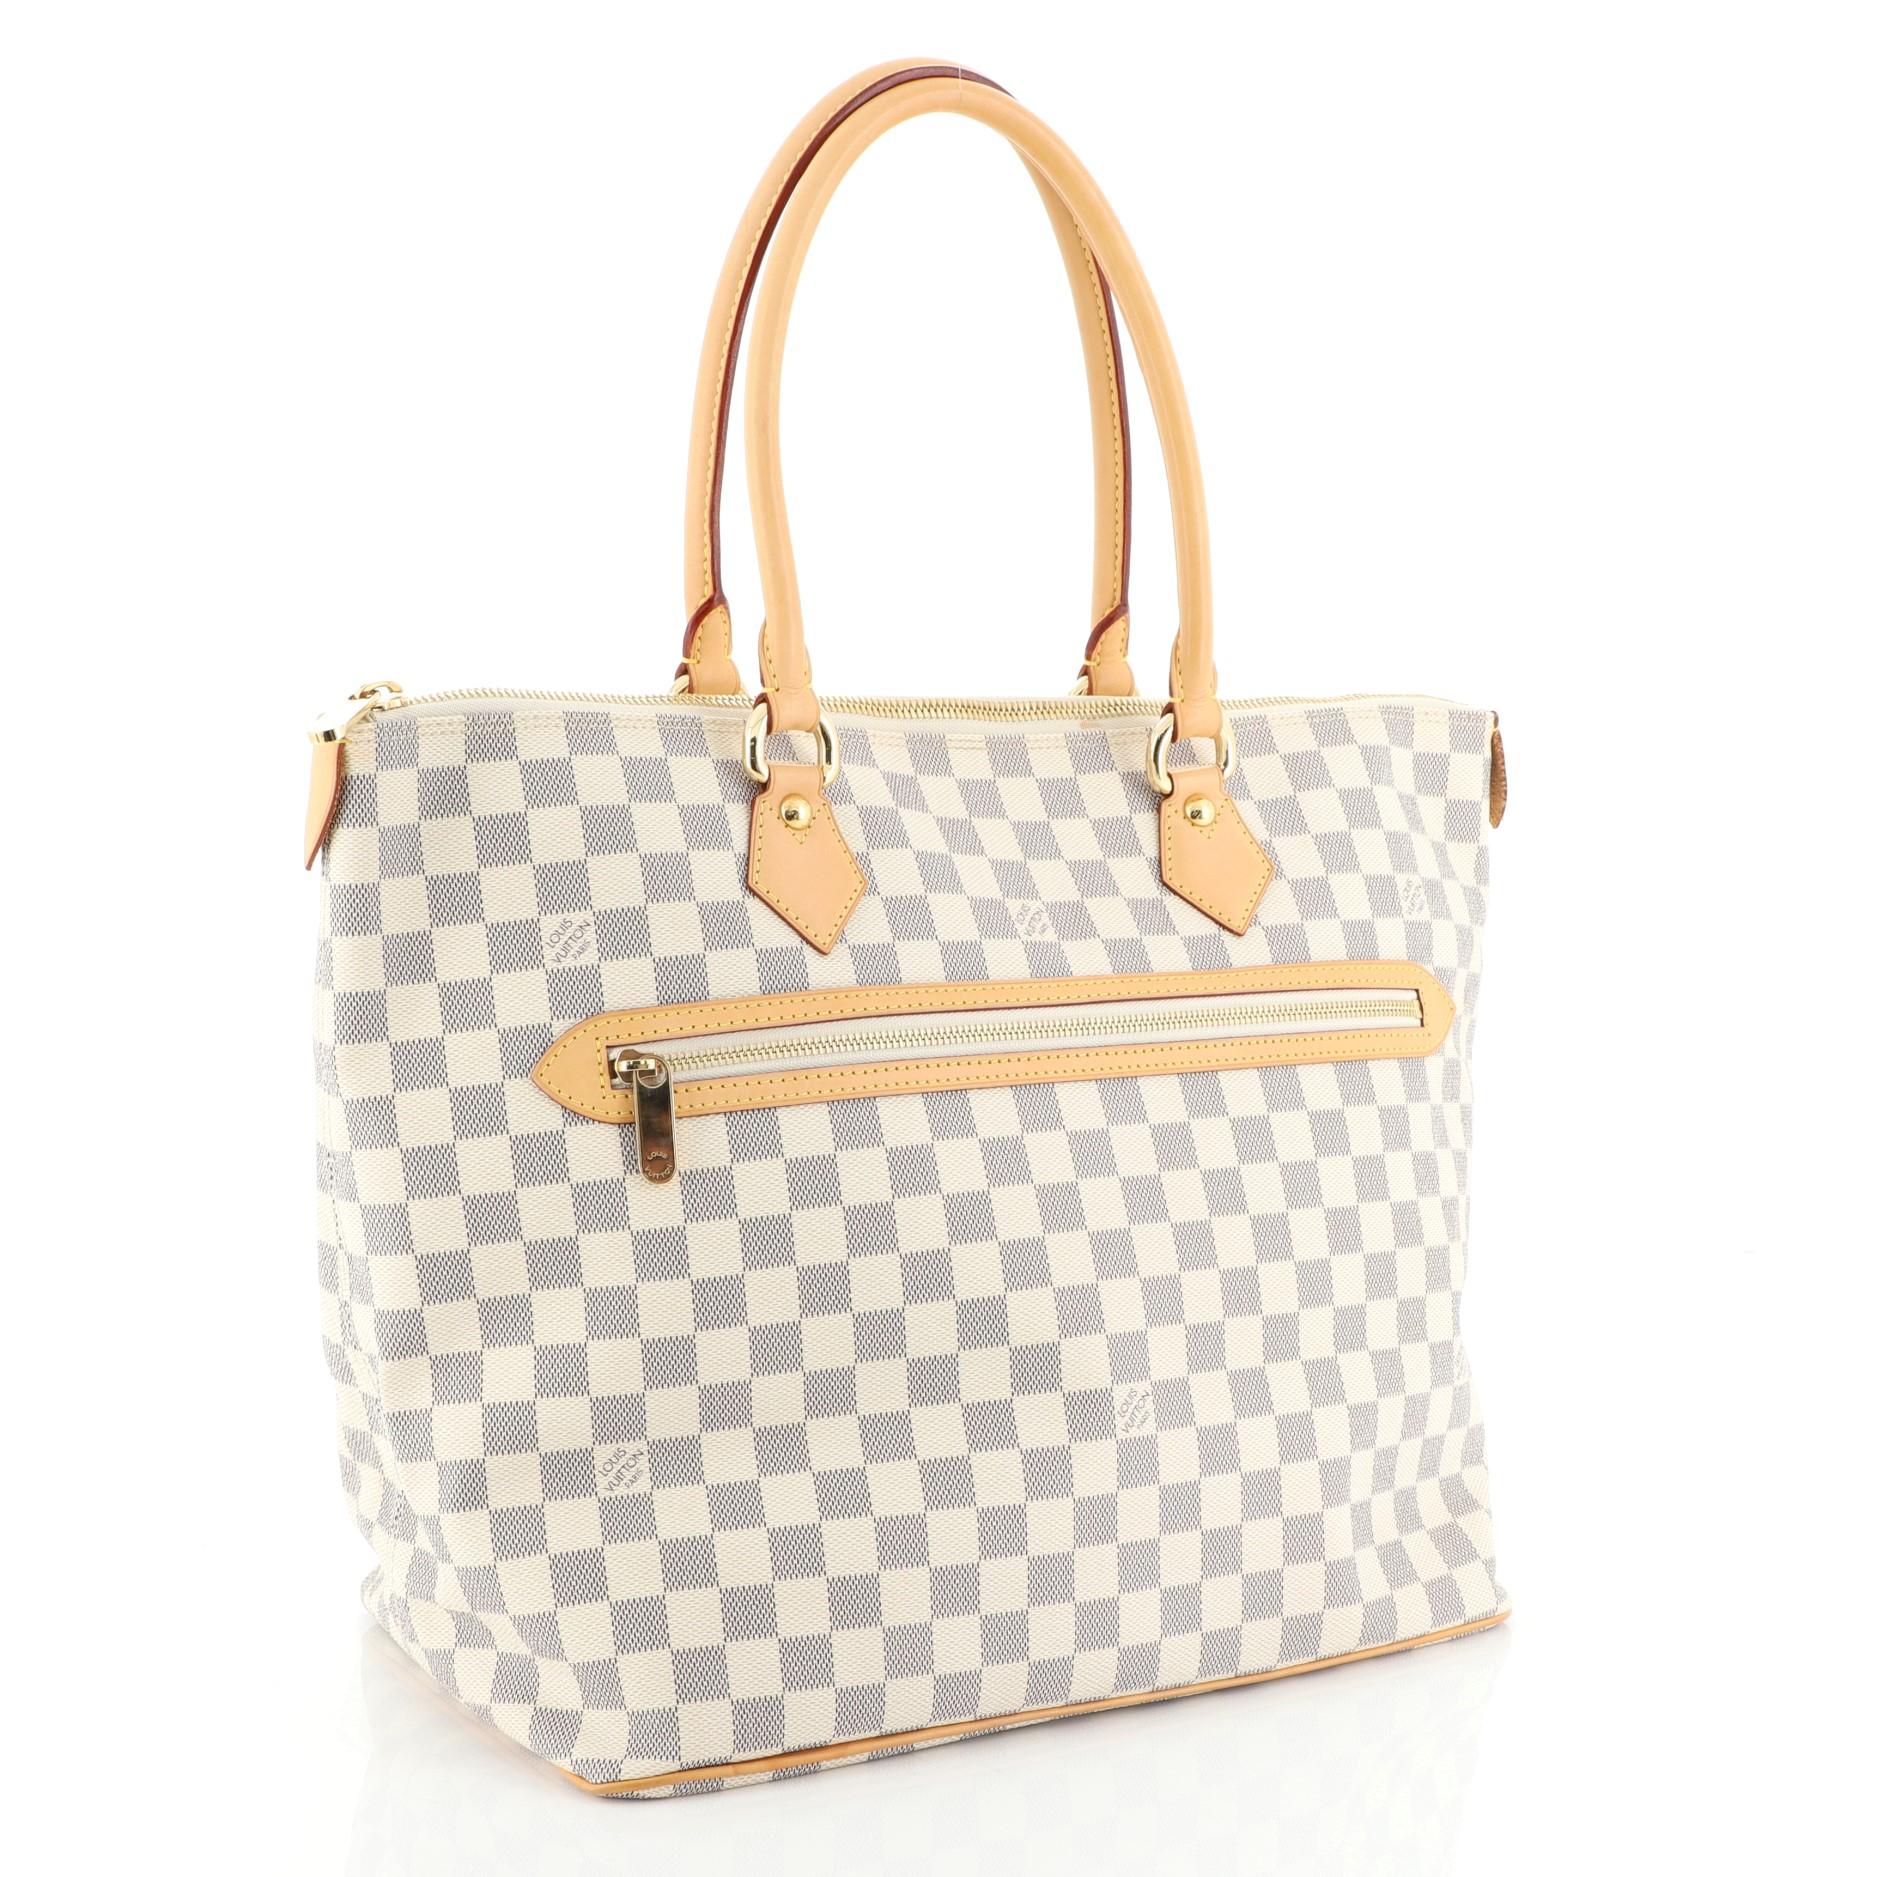 This Louis Vuitton Saleya Handbag Damier GM, crafted in damier azur coated canvas, features dual rolled leather handles, leather trim, exterior front zip pocket, and gold-tone hardware. Its top zip closure opens to a neutral microfiber interior with